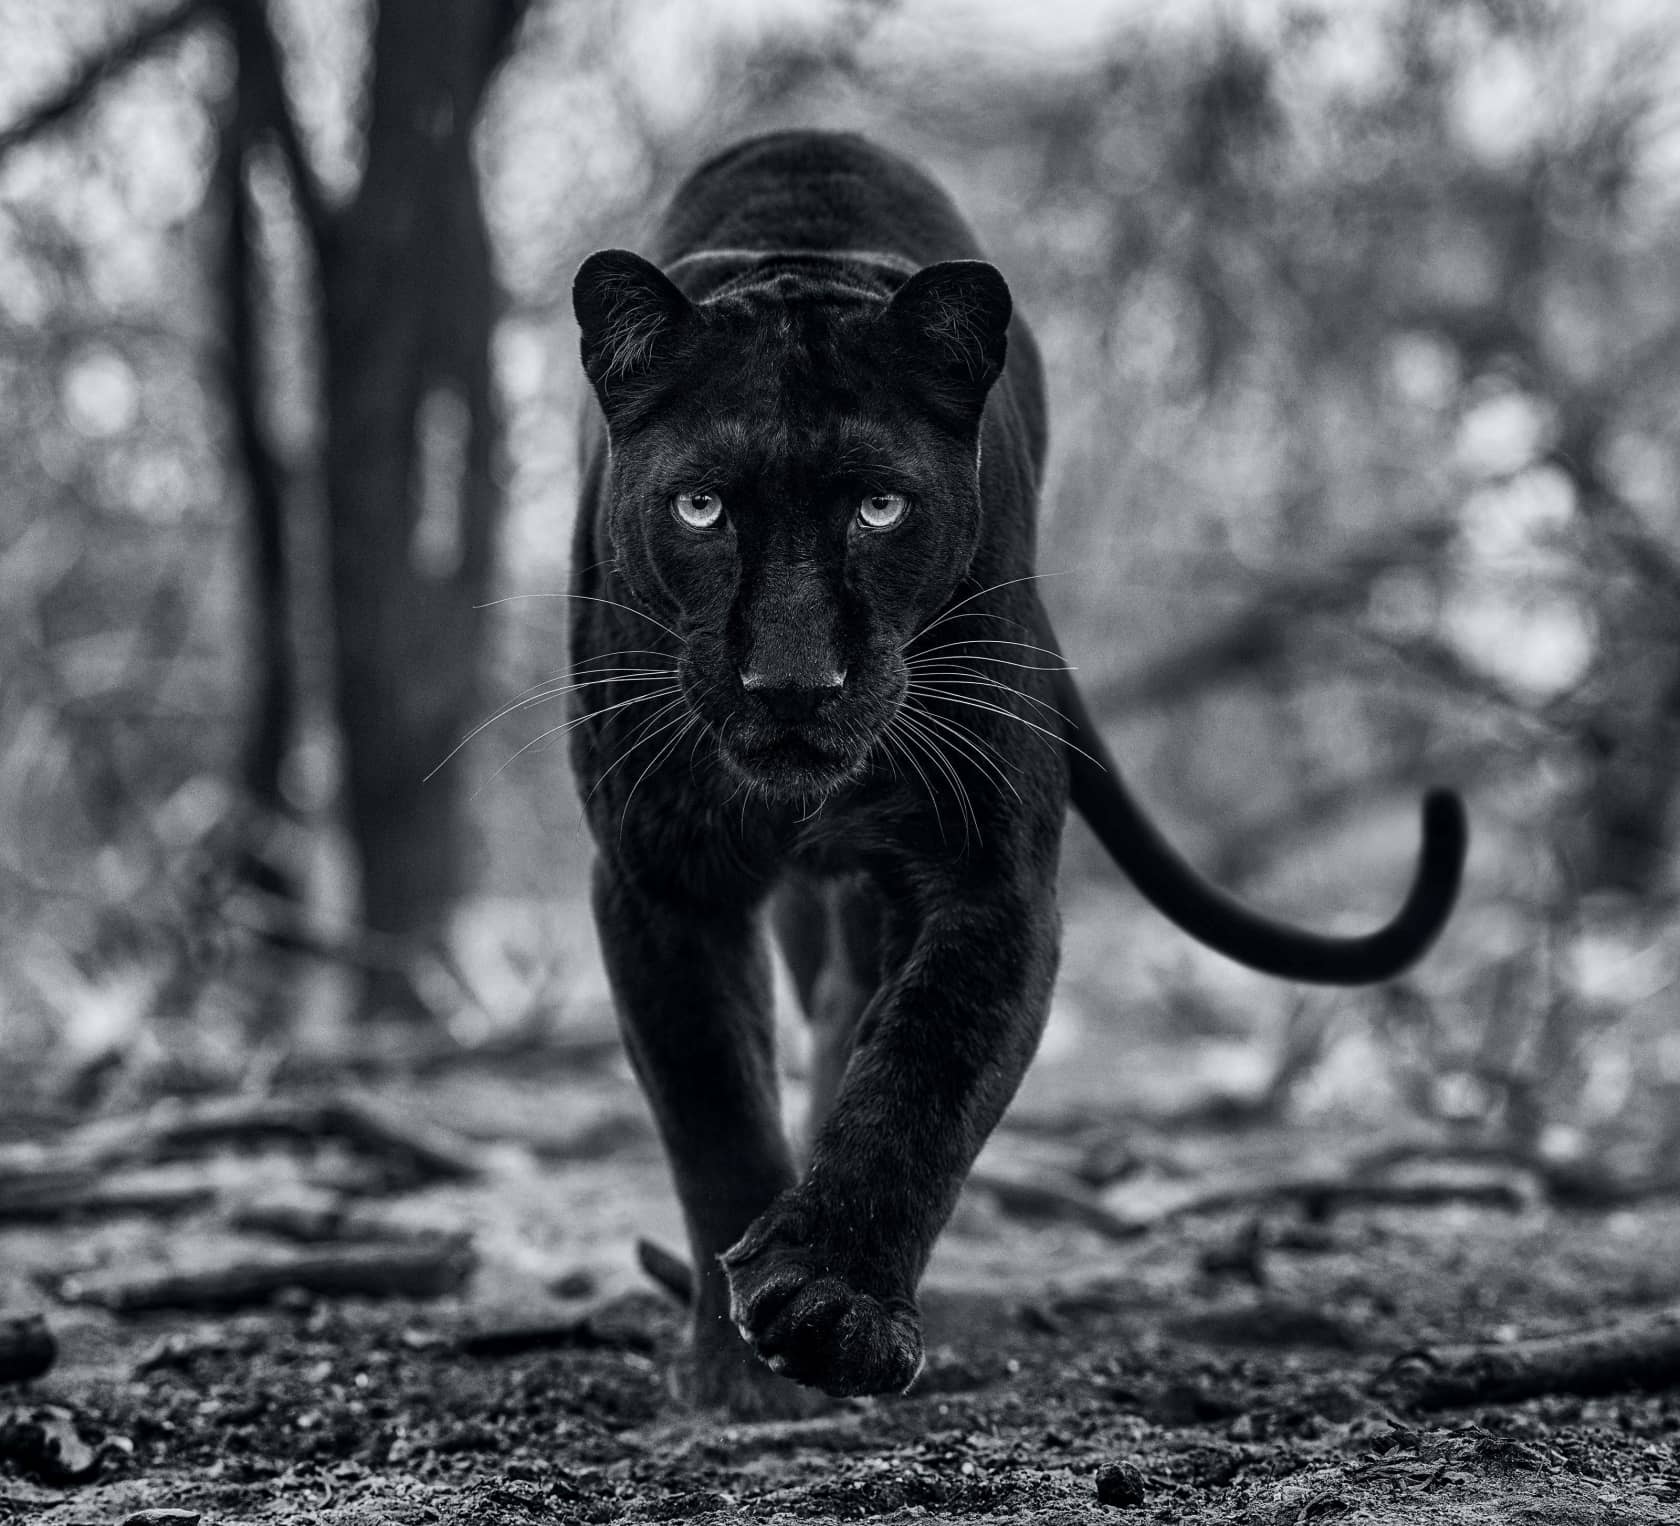 David Yarrow Remains of the Day Archival Pigment Print